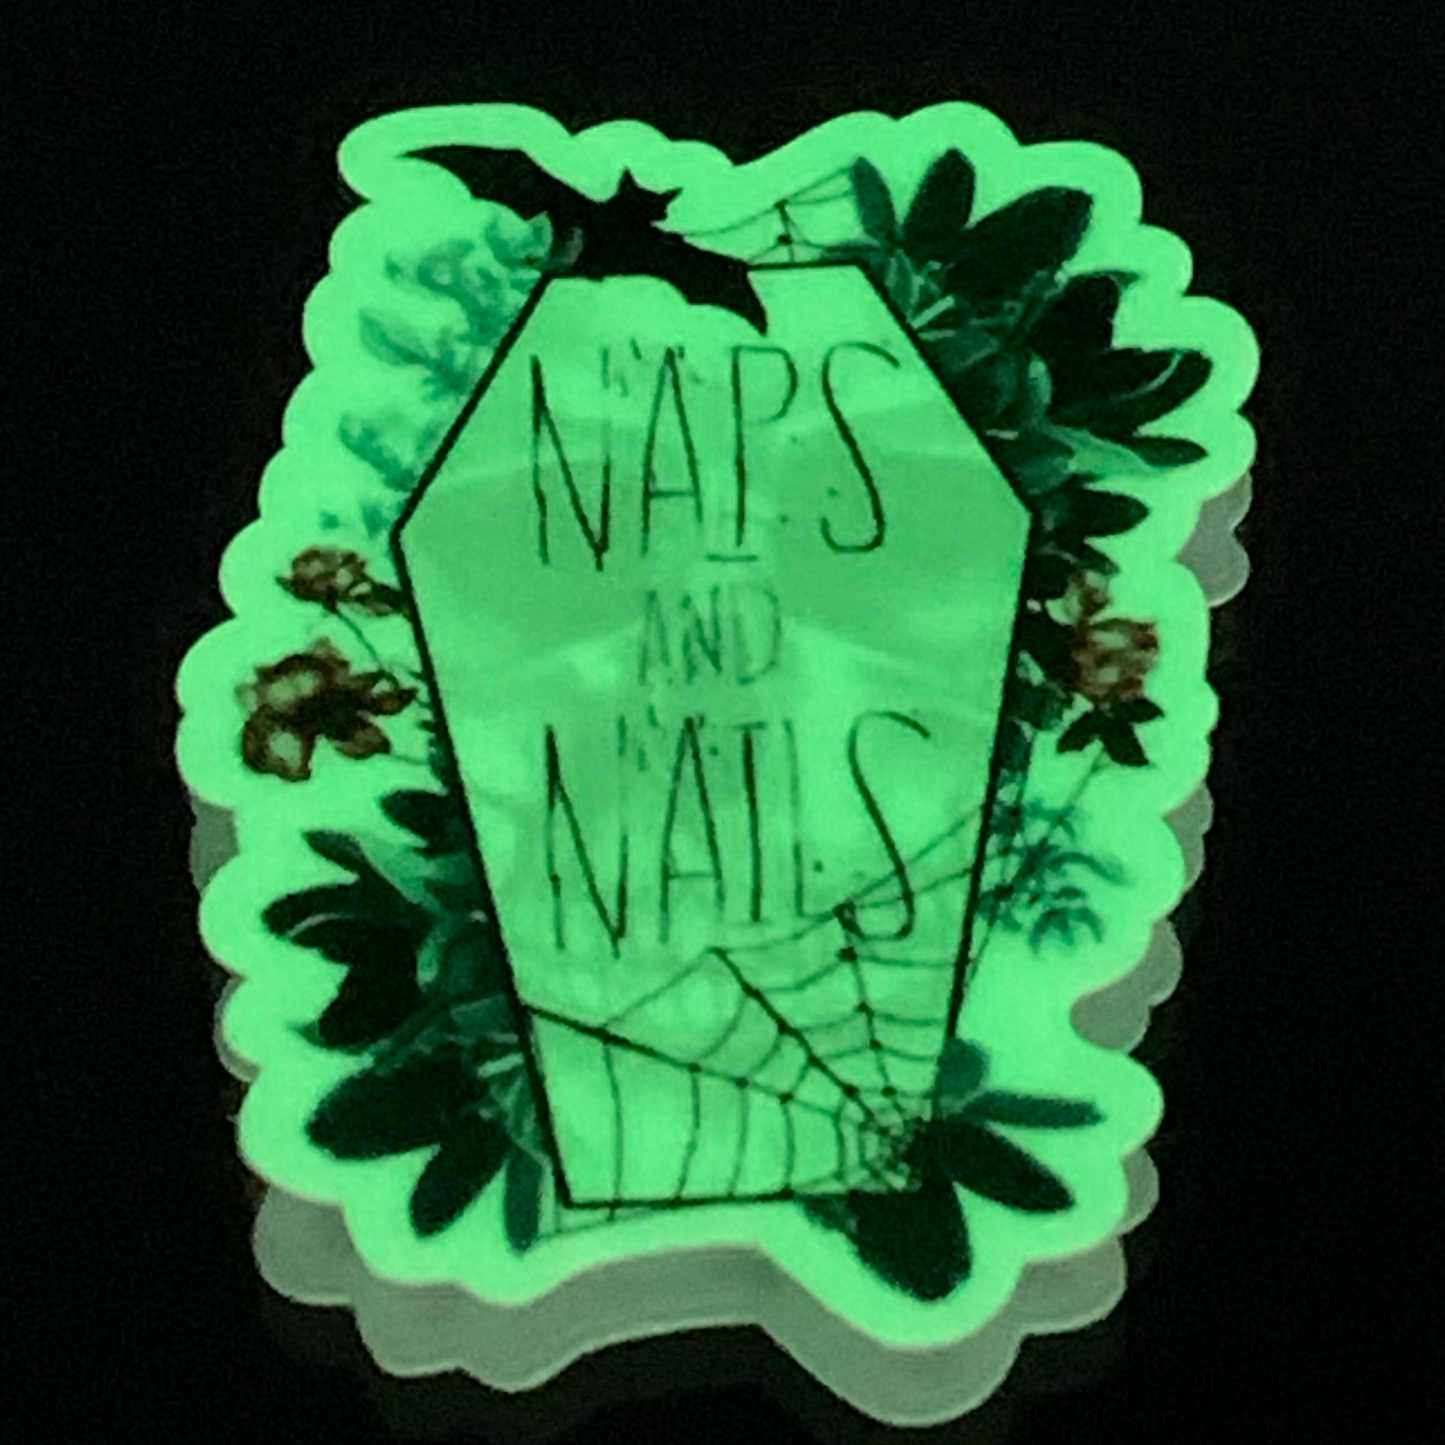 Naps and Nails Logo Stickers